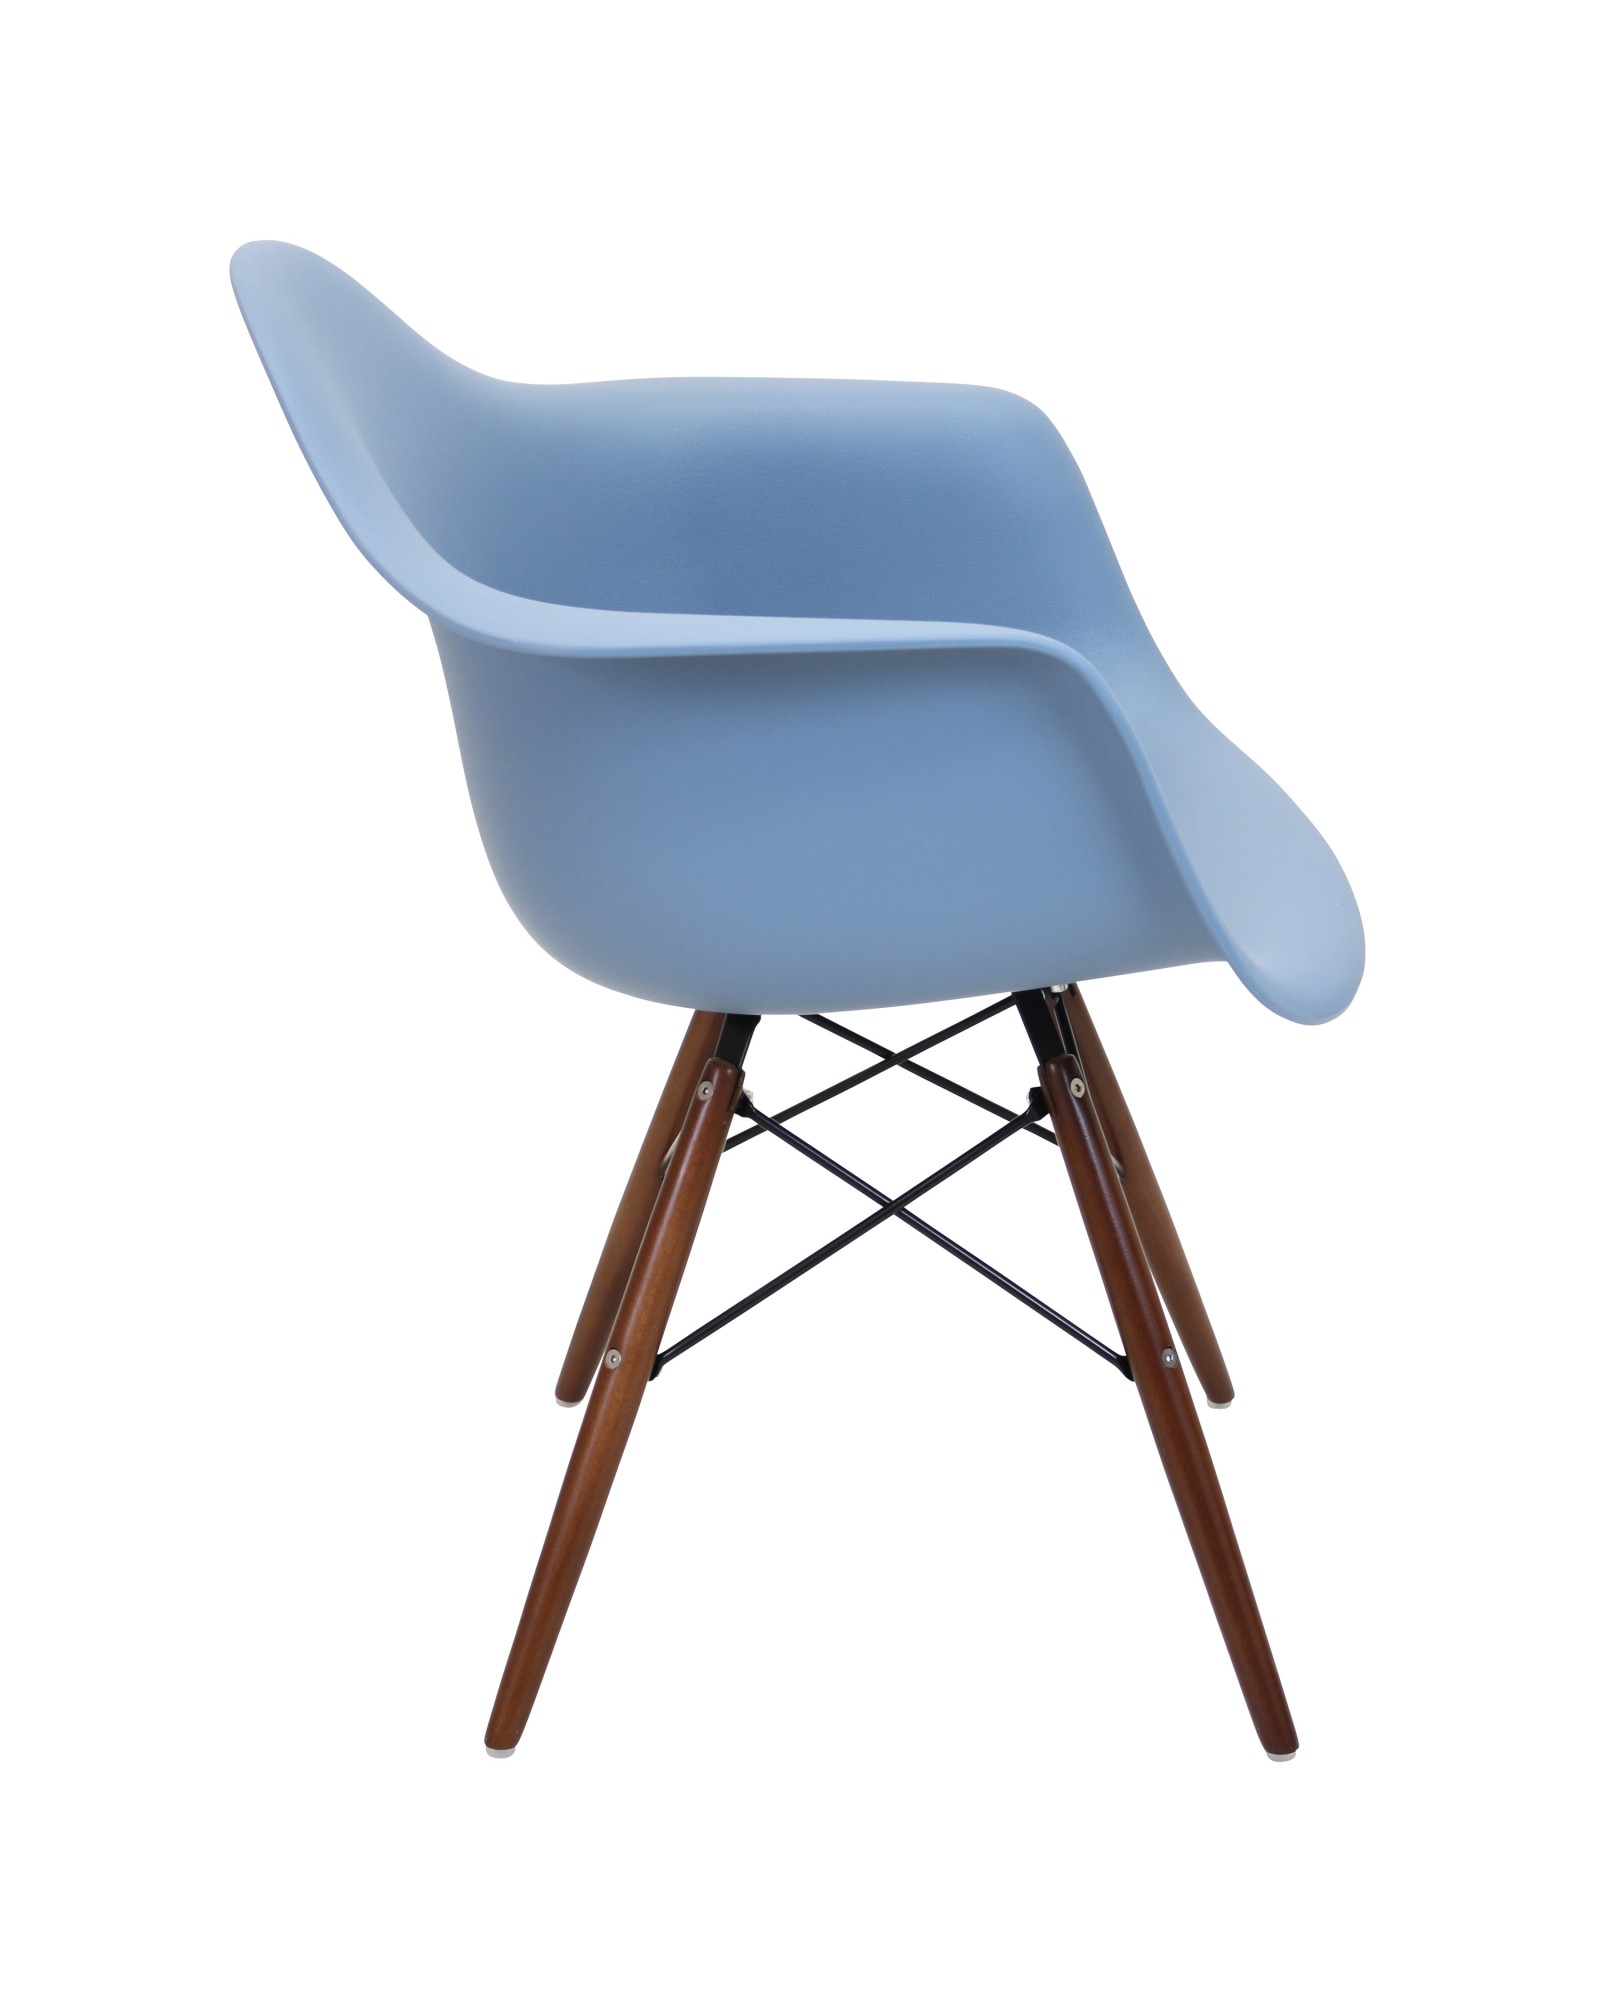 Neo Flair Mid-Century Modern Chair in Bleu Slate and Espresso - Set of 2